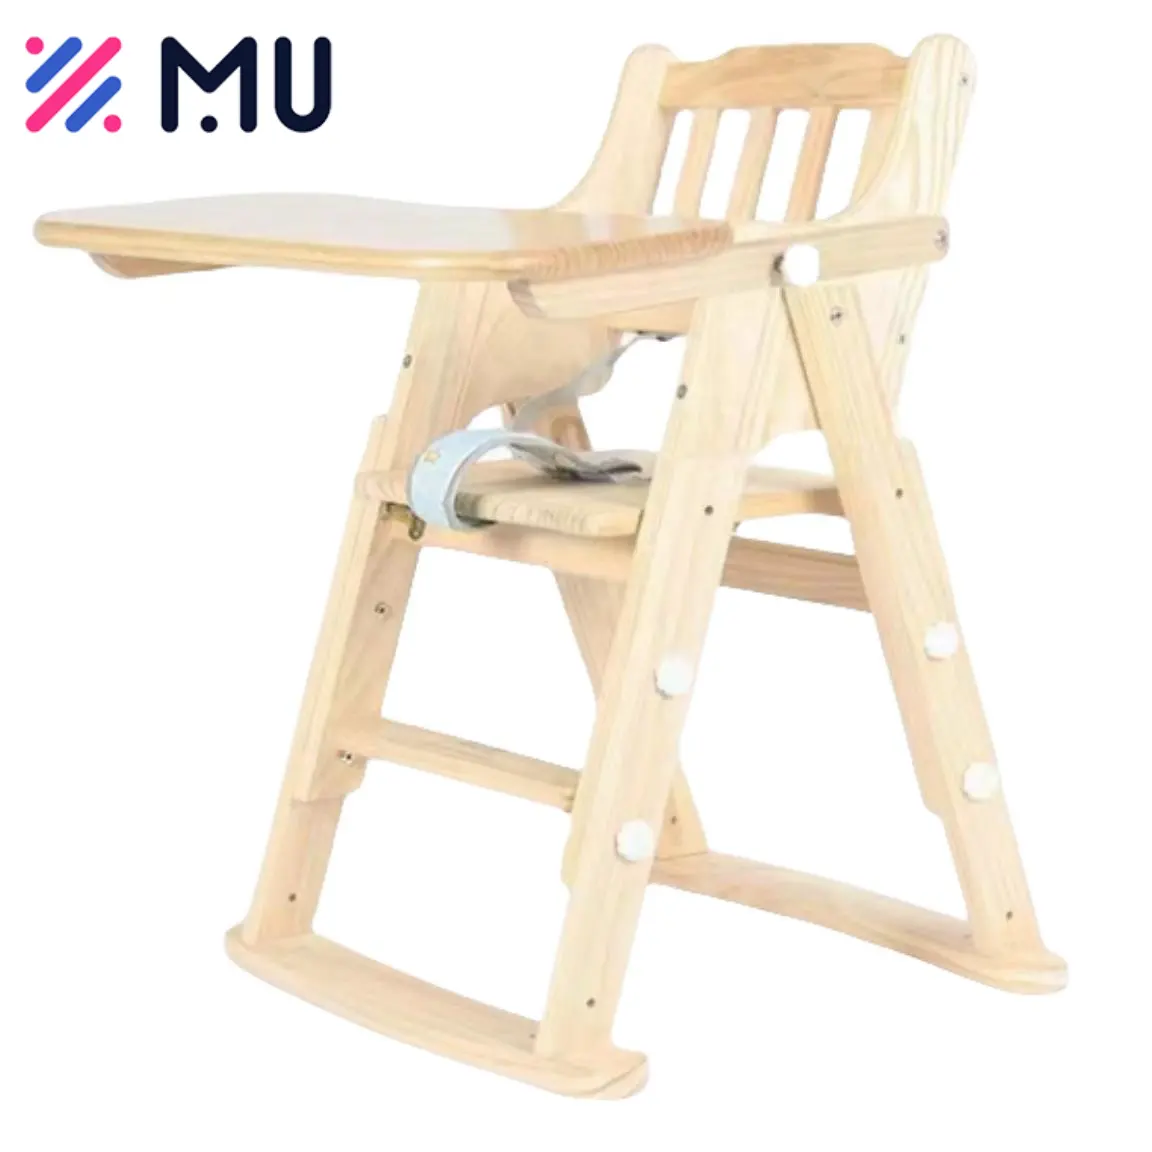 Foldable Pine Wooden Swing Chair Children Baby Dining Table Chair with Tray Adjustment